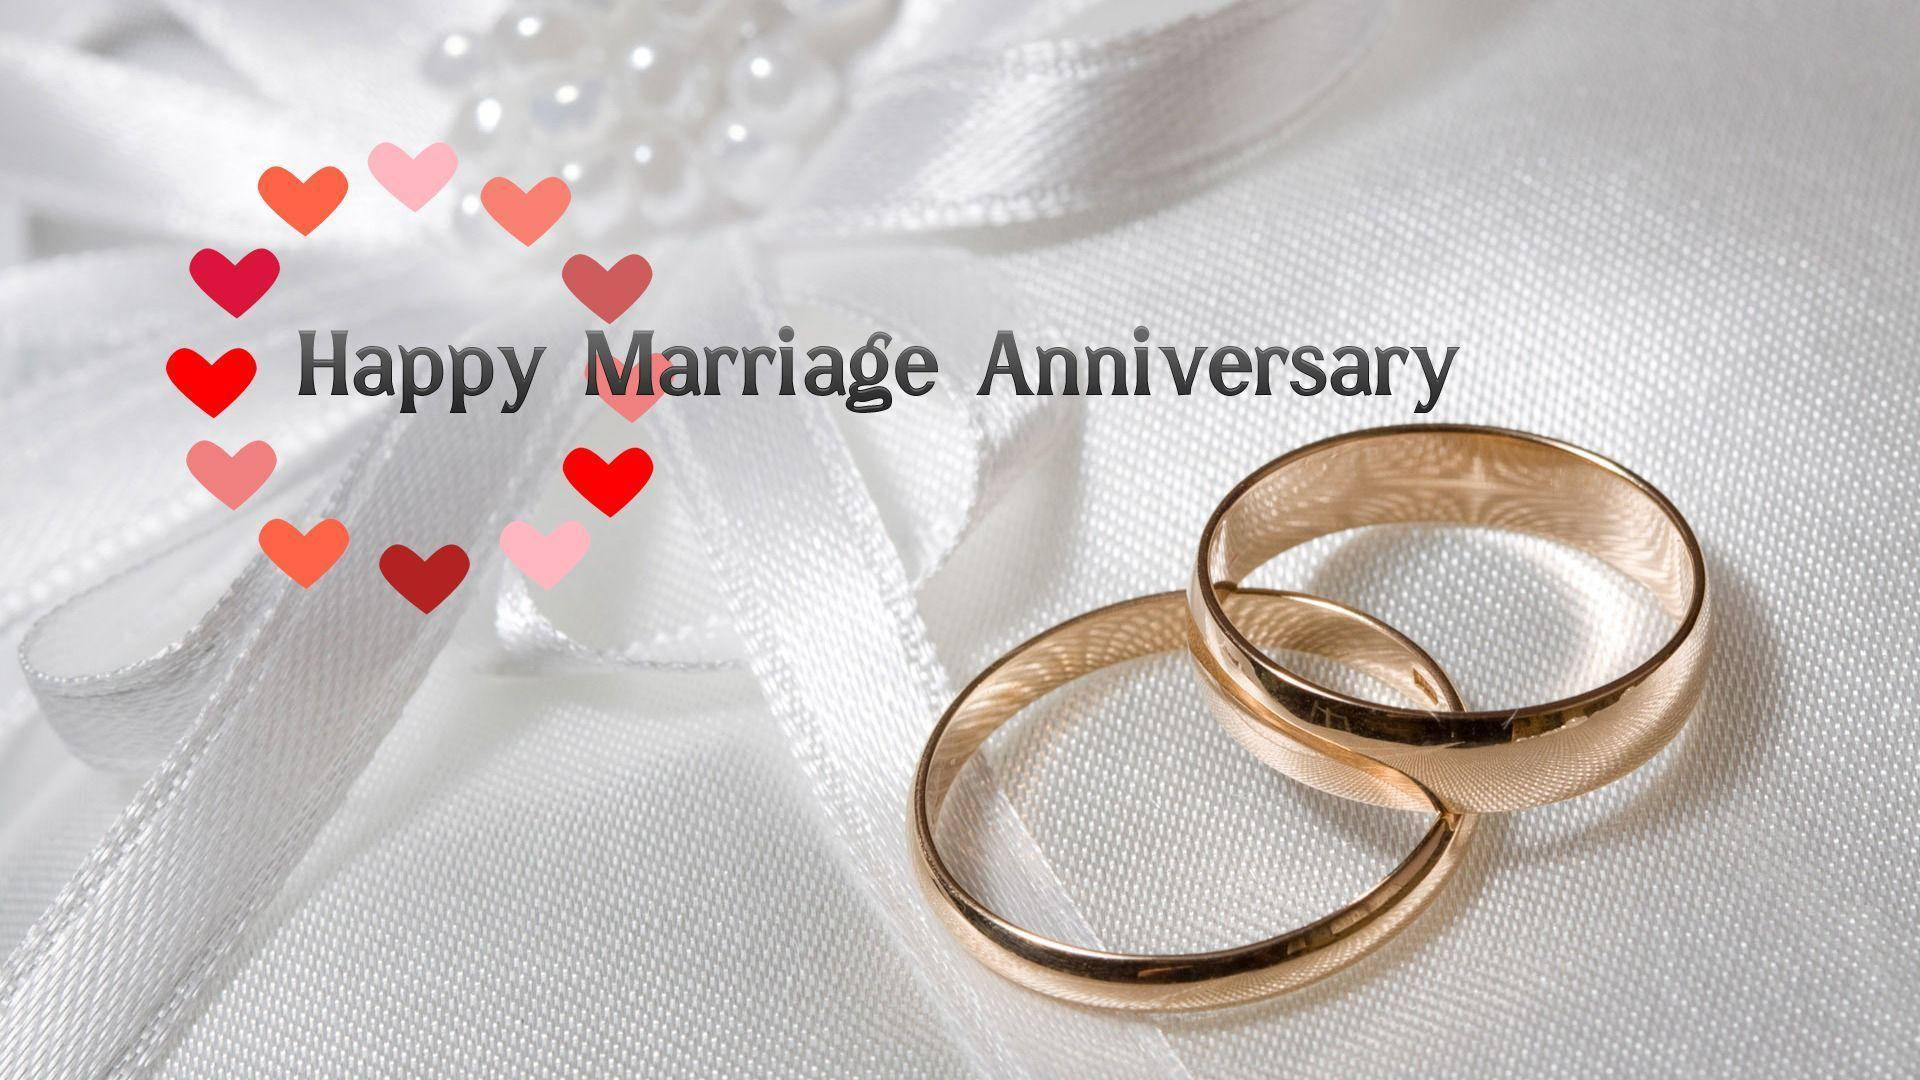 Happy Anniversary Gold Wedding Rings Background